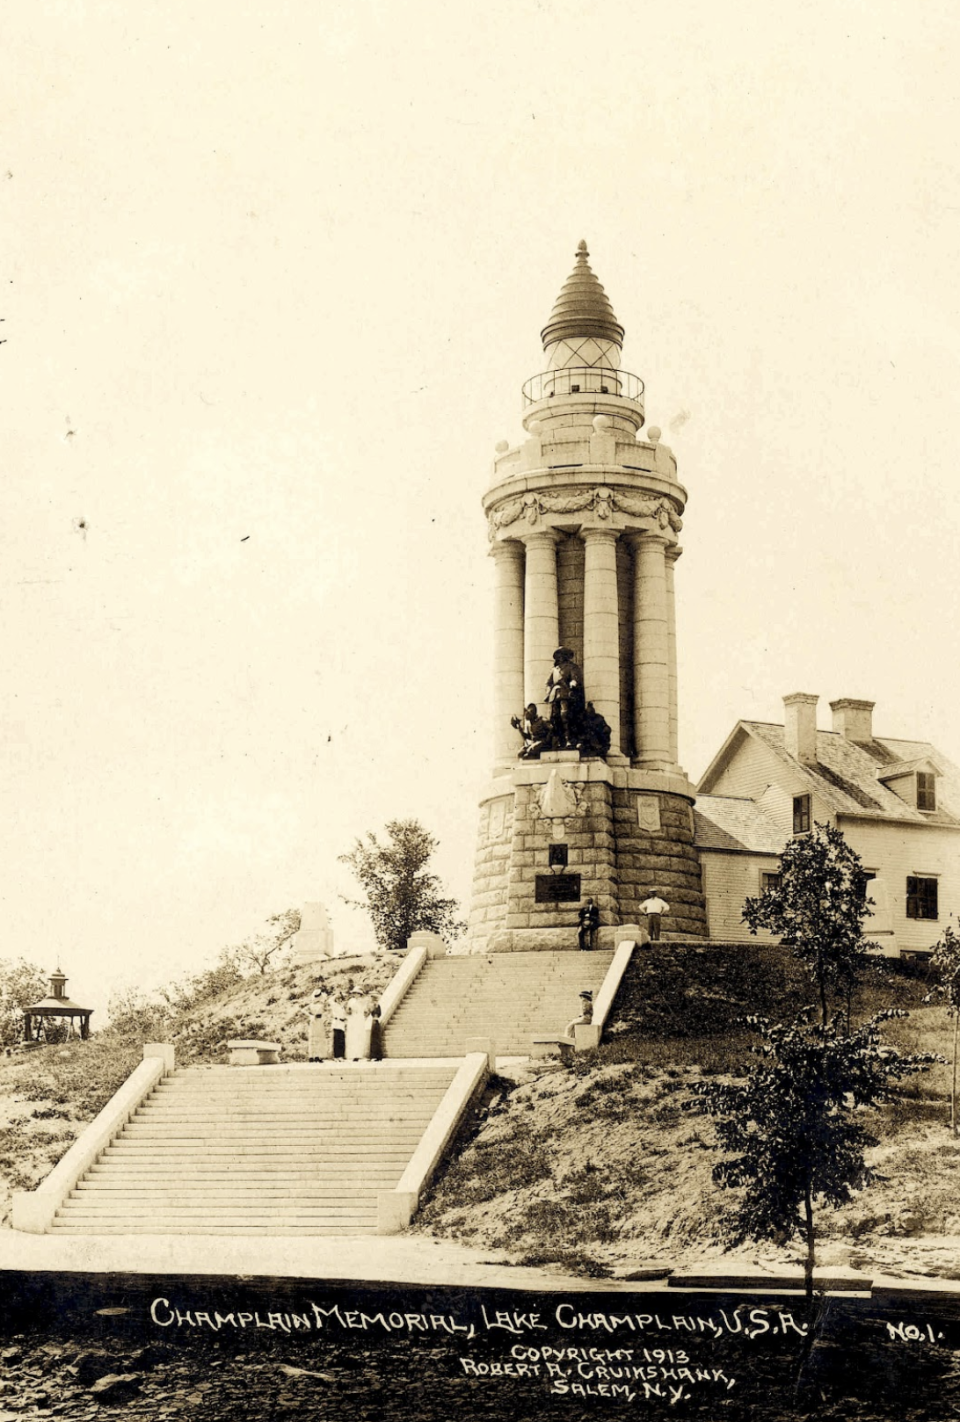 Vintage, sepa-toned postcard depicting the Champlain Memorial Lighthouse in 1913.